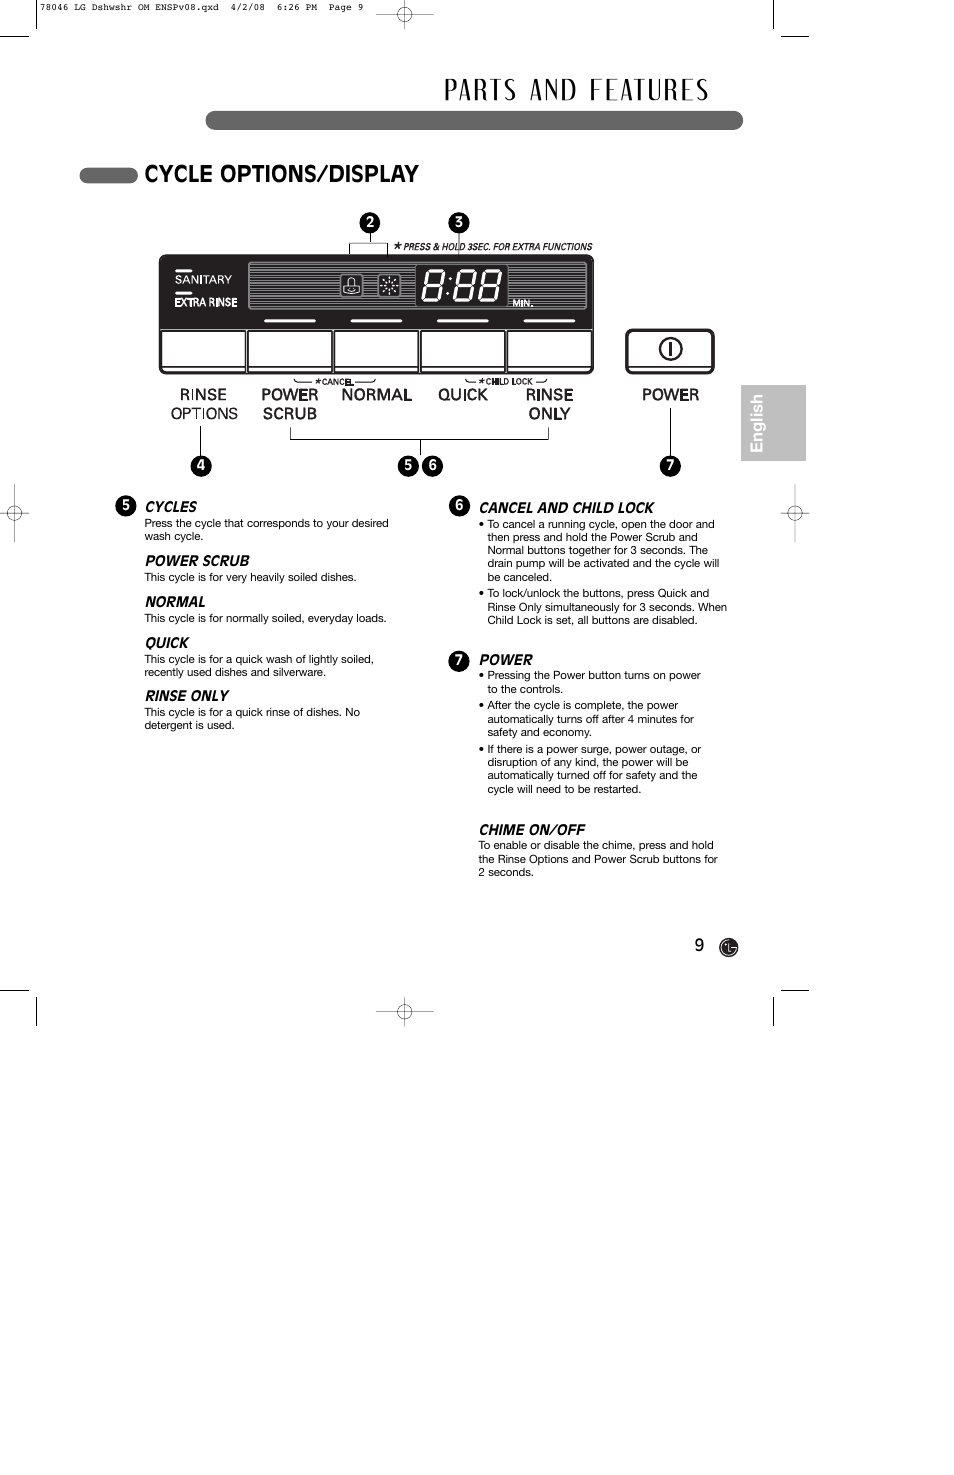 Cycle options/display | LG LDS4821ST User Manual | Page 9 / 68